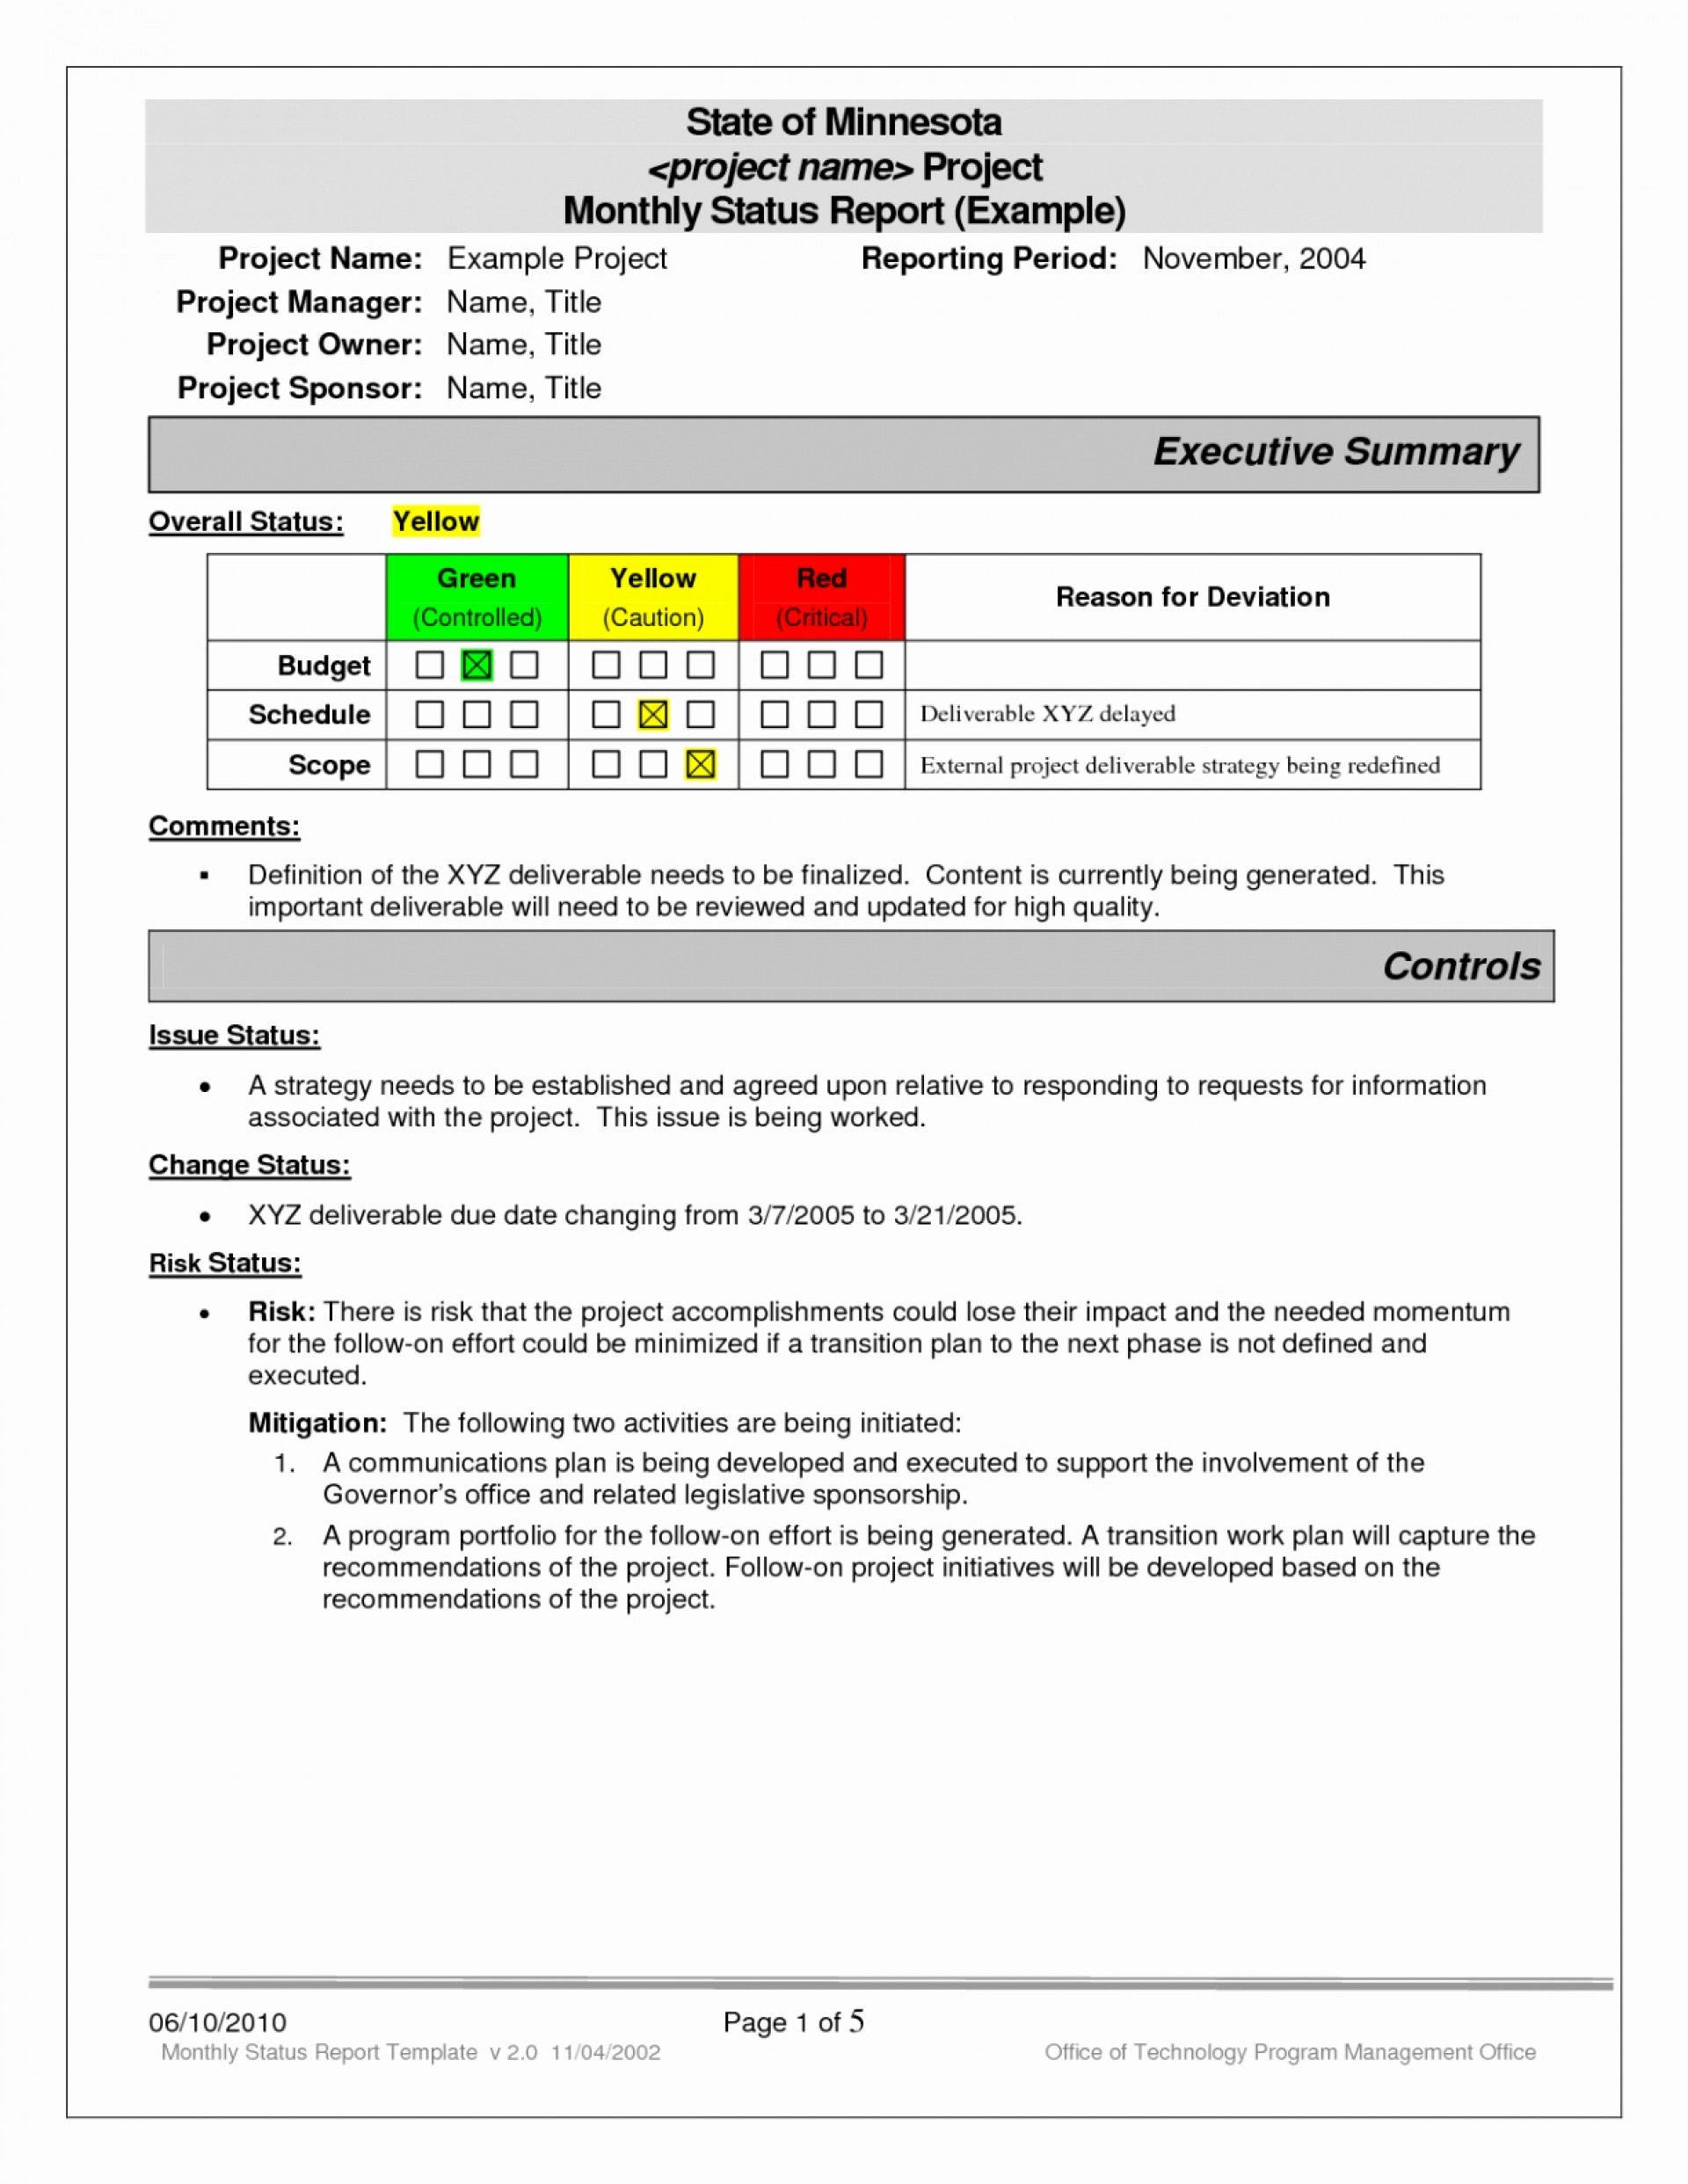 023 Excel Project Status Report Weekly Template 4Vy49Mzf Intended For Software Testing Weekly Status Report Template